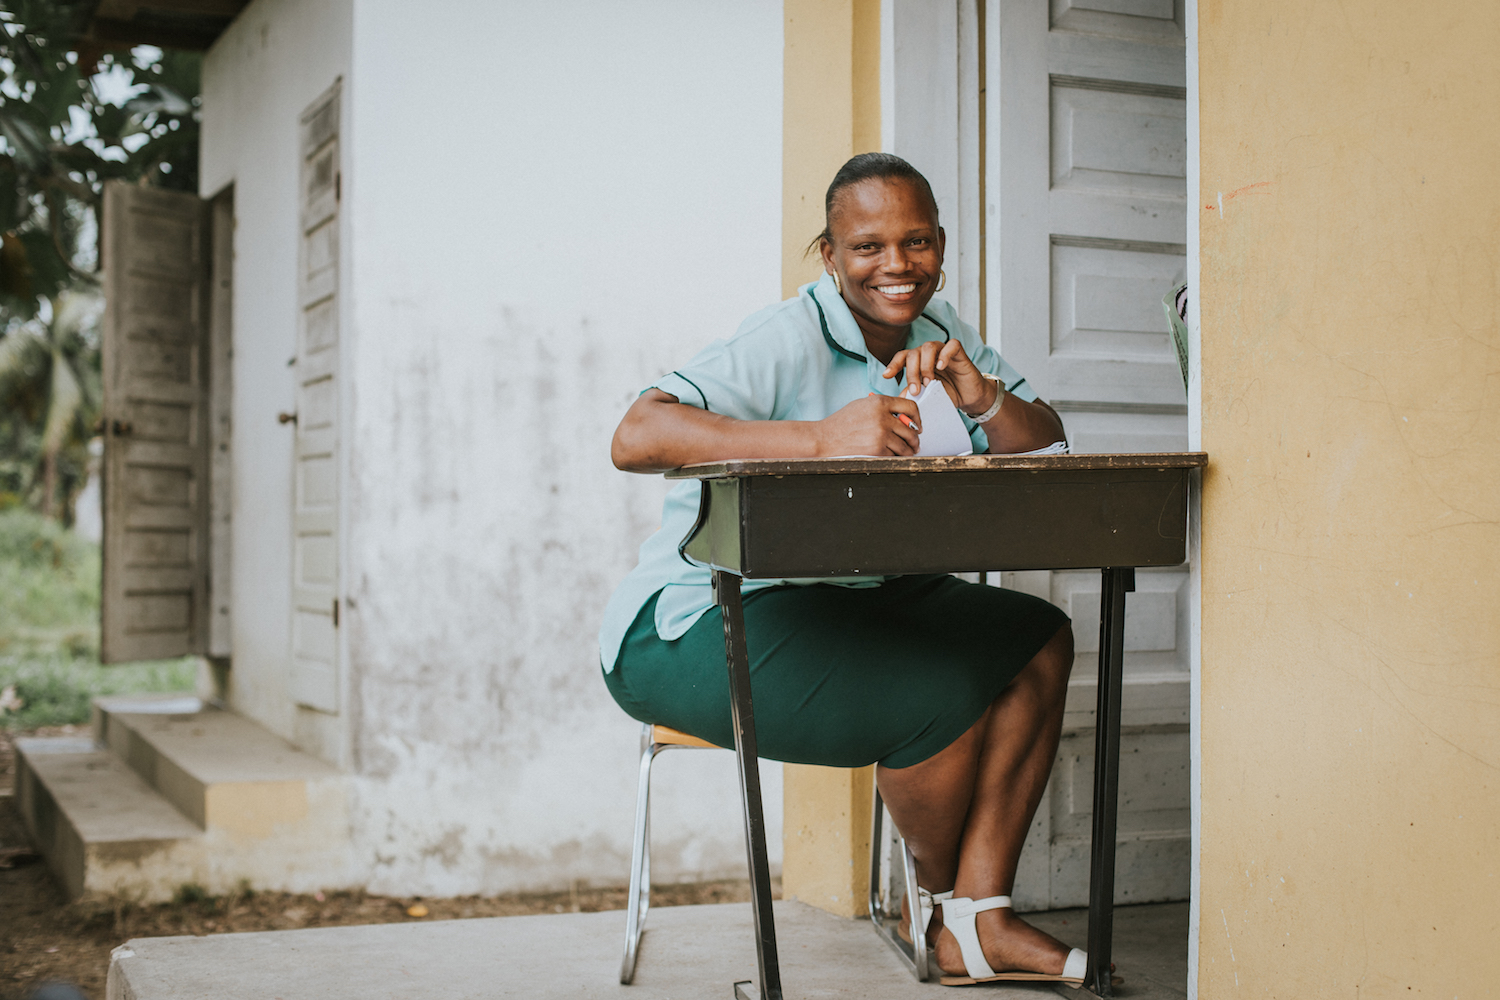  In nearby Dangriga, the capital of Belize's Stann Creek District, a young teacher poses for a photo while class is still in session inside the schoolhouse. 